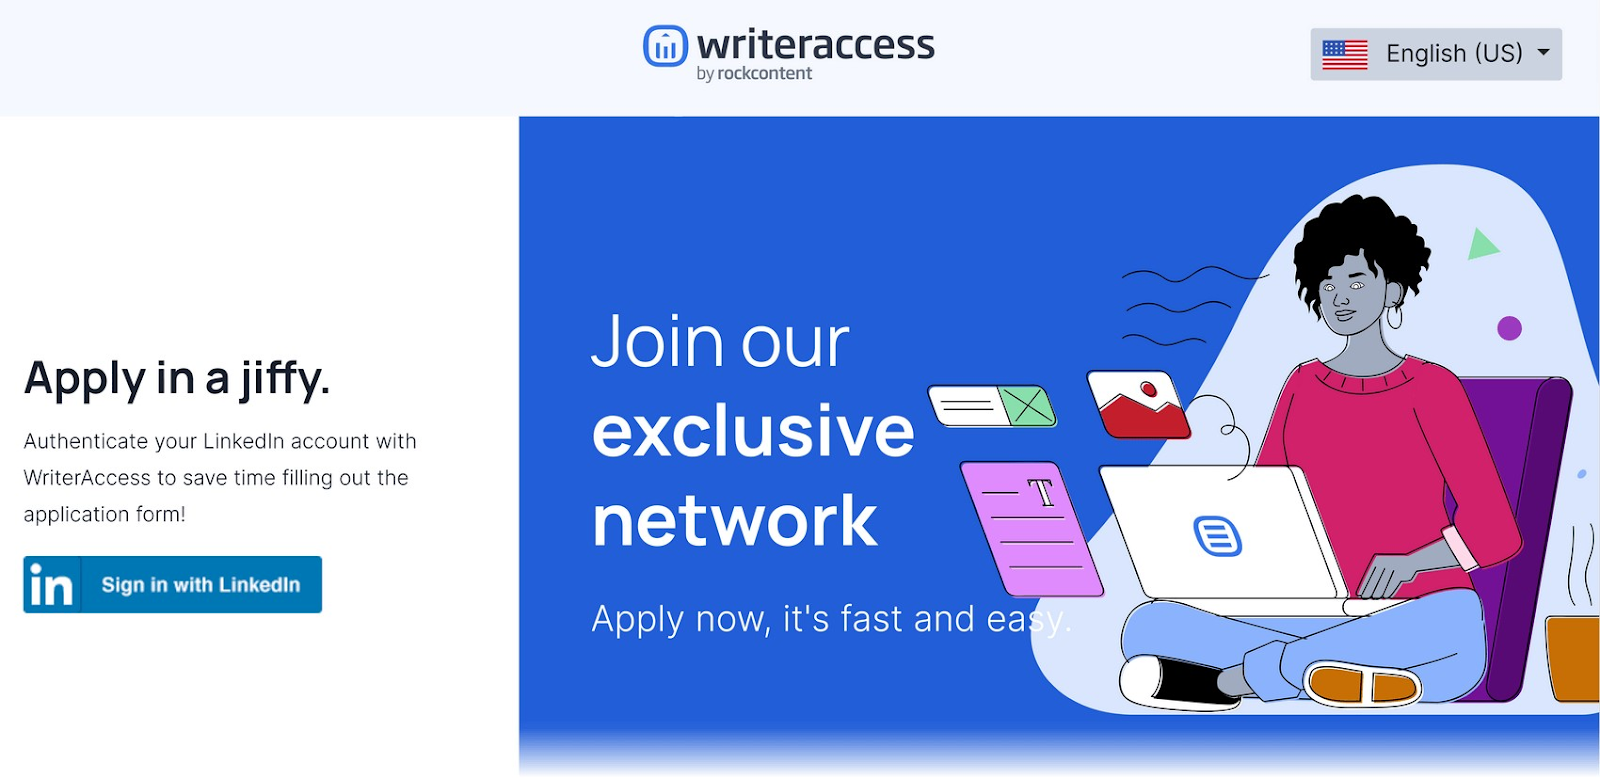 WriterAccess "Apply in a jiffy" page